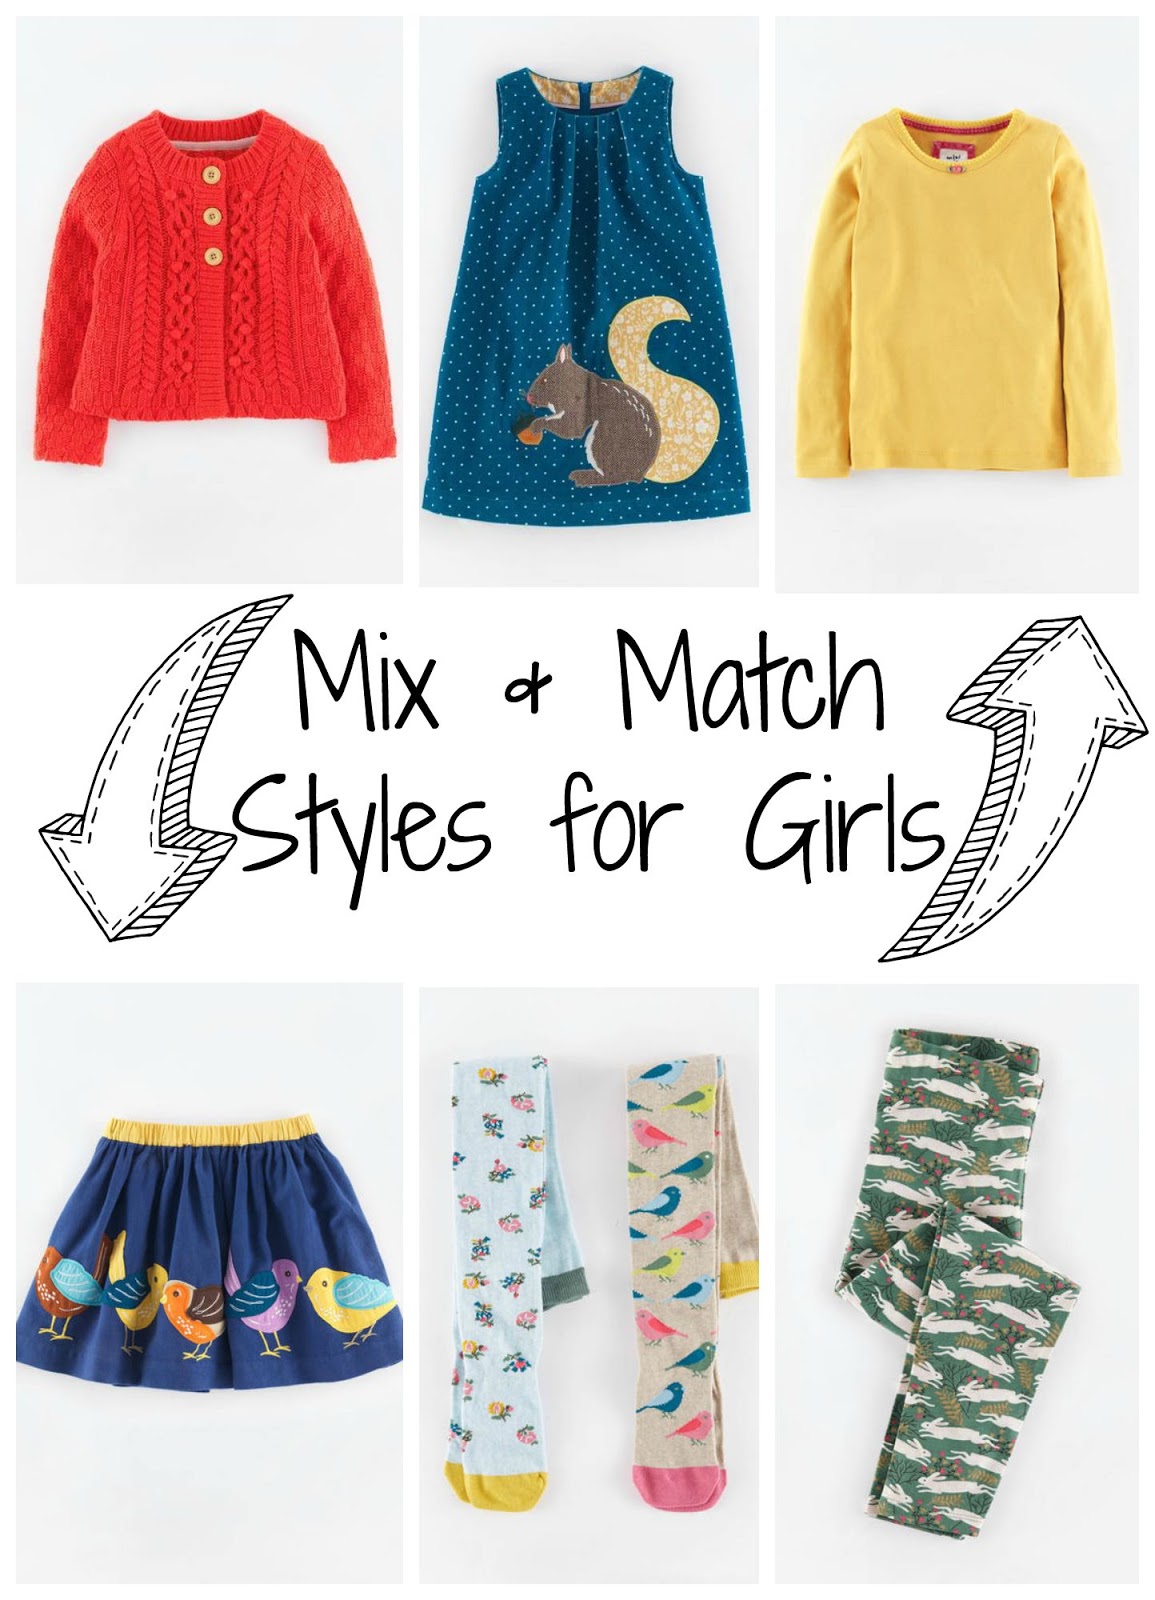 Our Favorite Mix & Match School Styles for Boys & Girls - The Chirping Moms